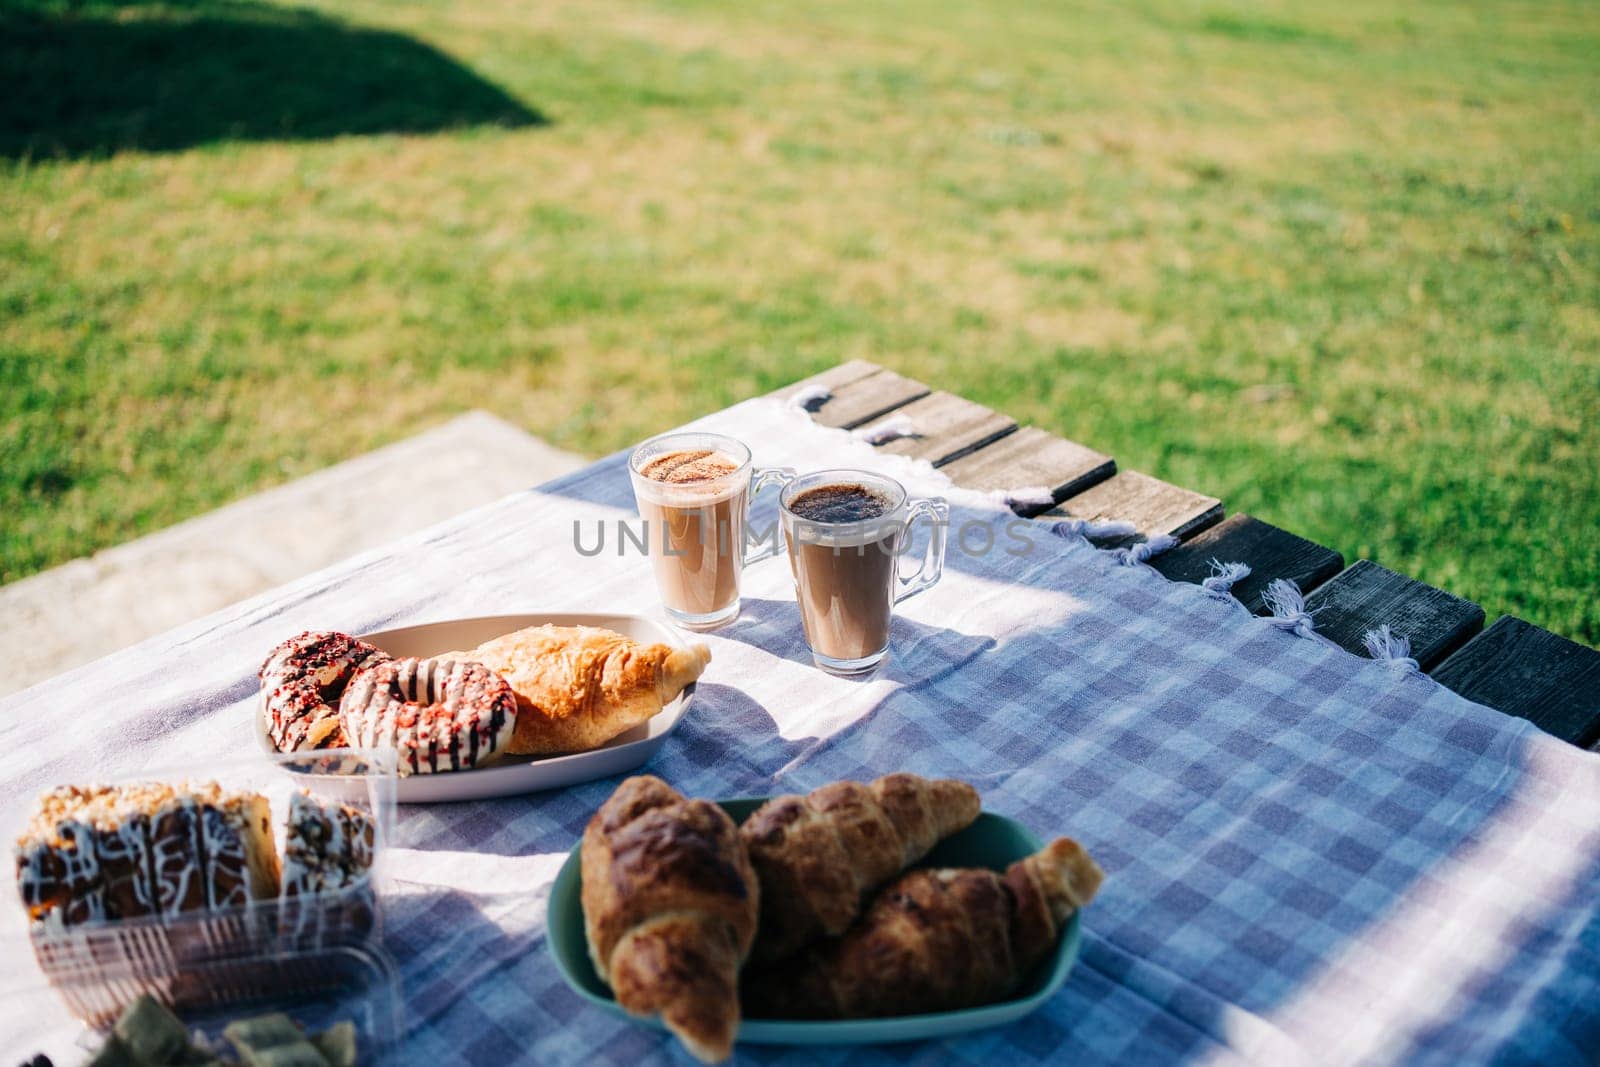 A picnic at the green lawn in the park. Closeup picture of breakfast with coffee, croissants and donuts on green grass outdoors meadow. by Ostanina